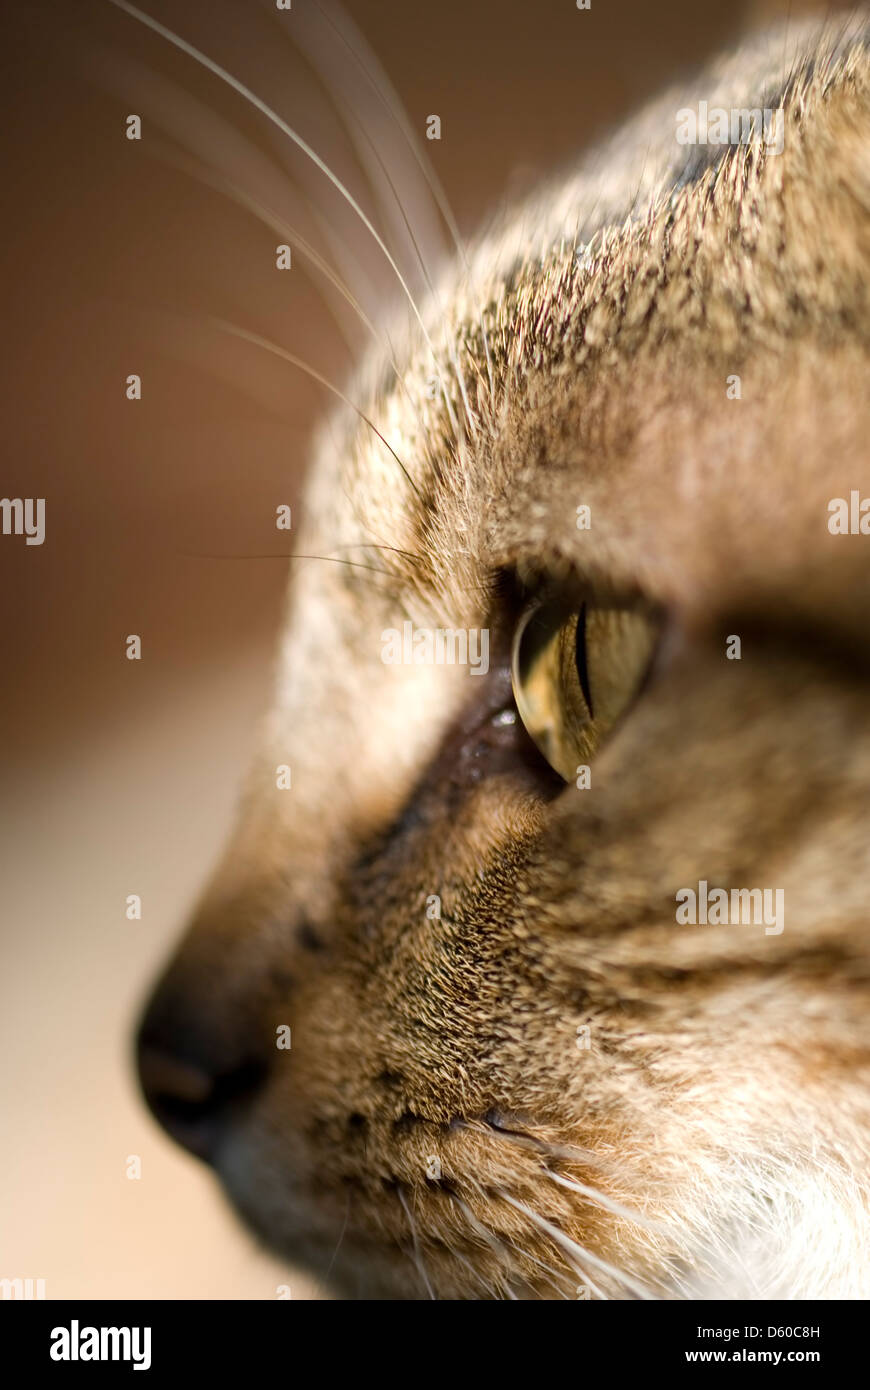 Close up of a cat in profile Stock Photo